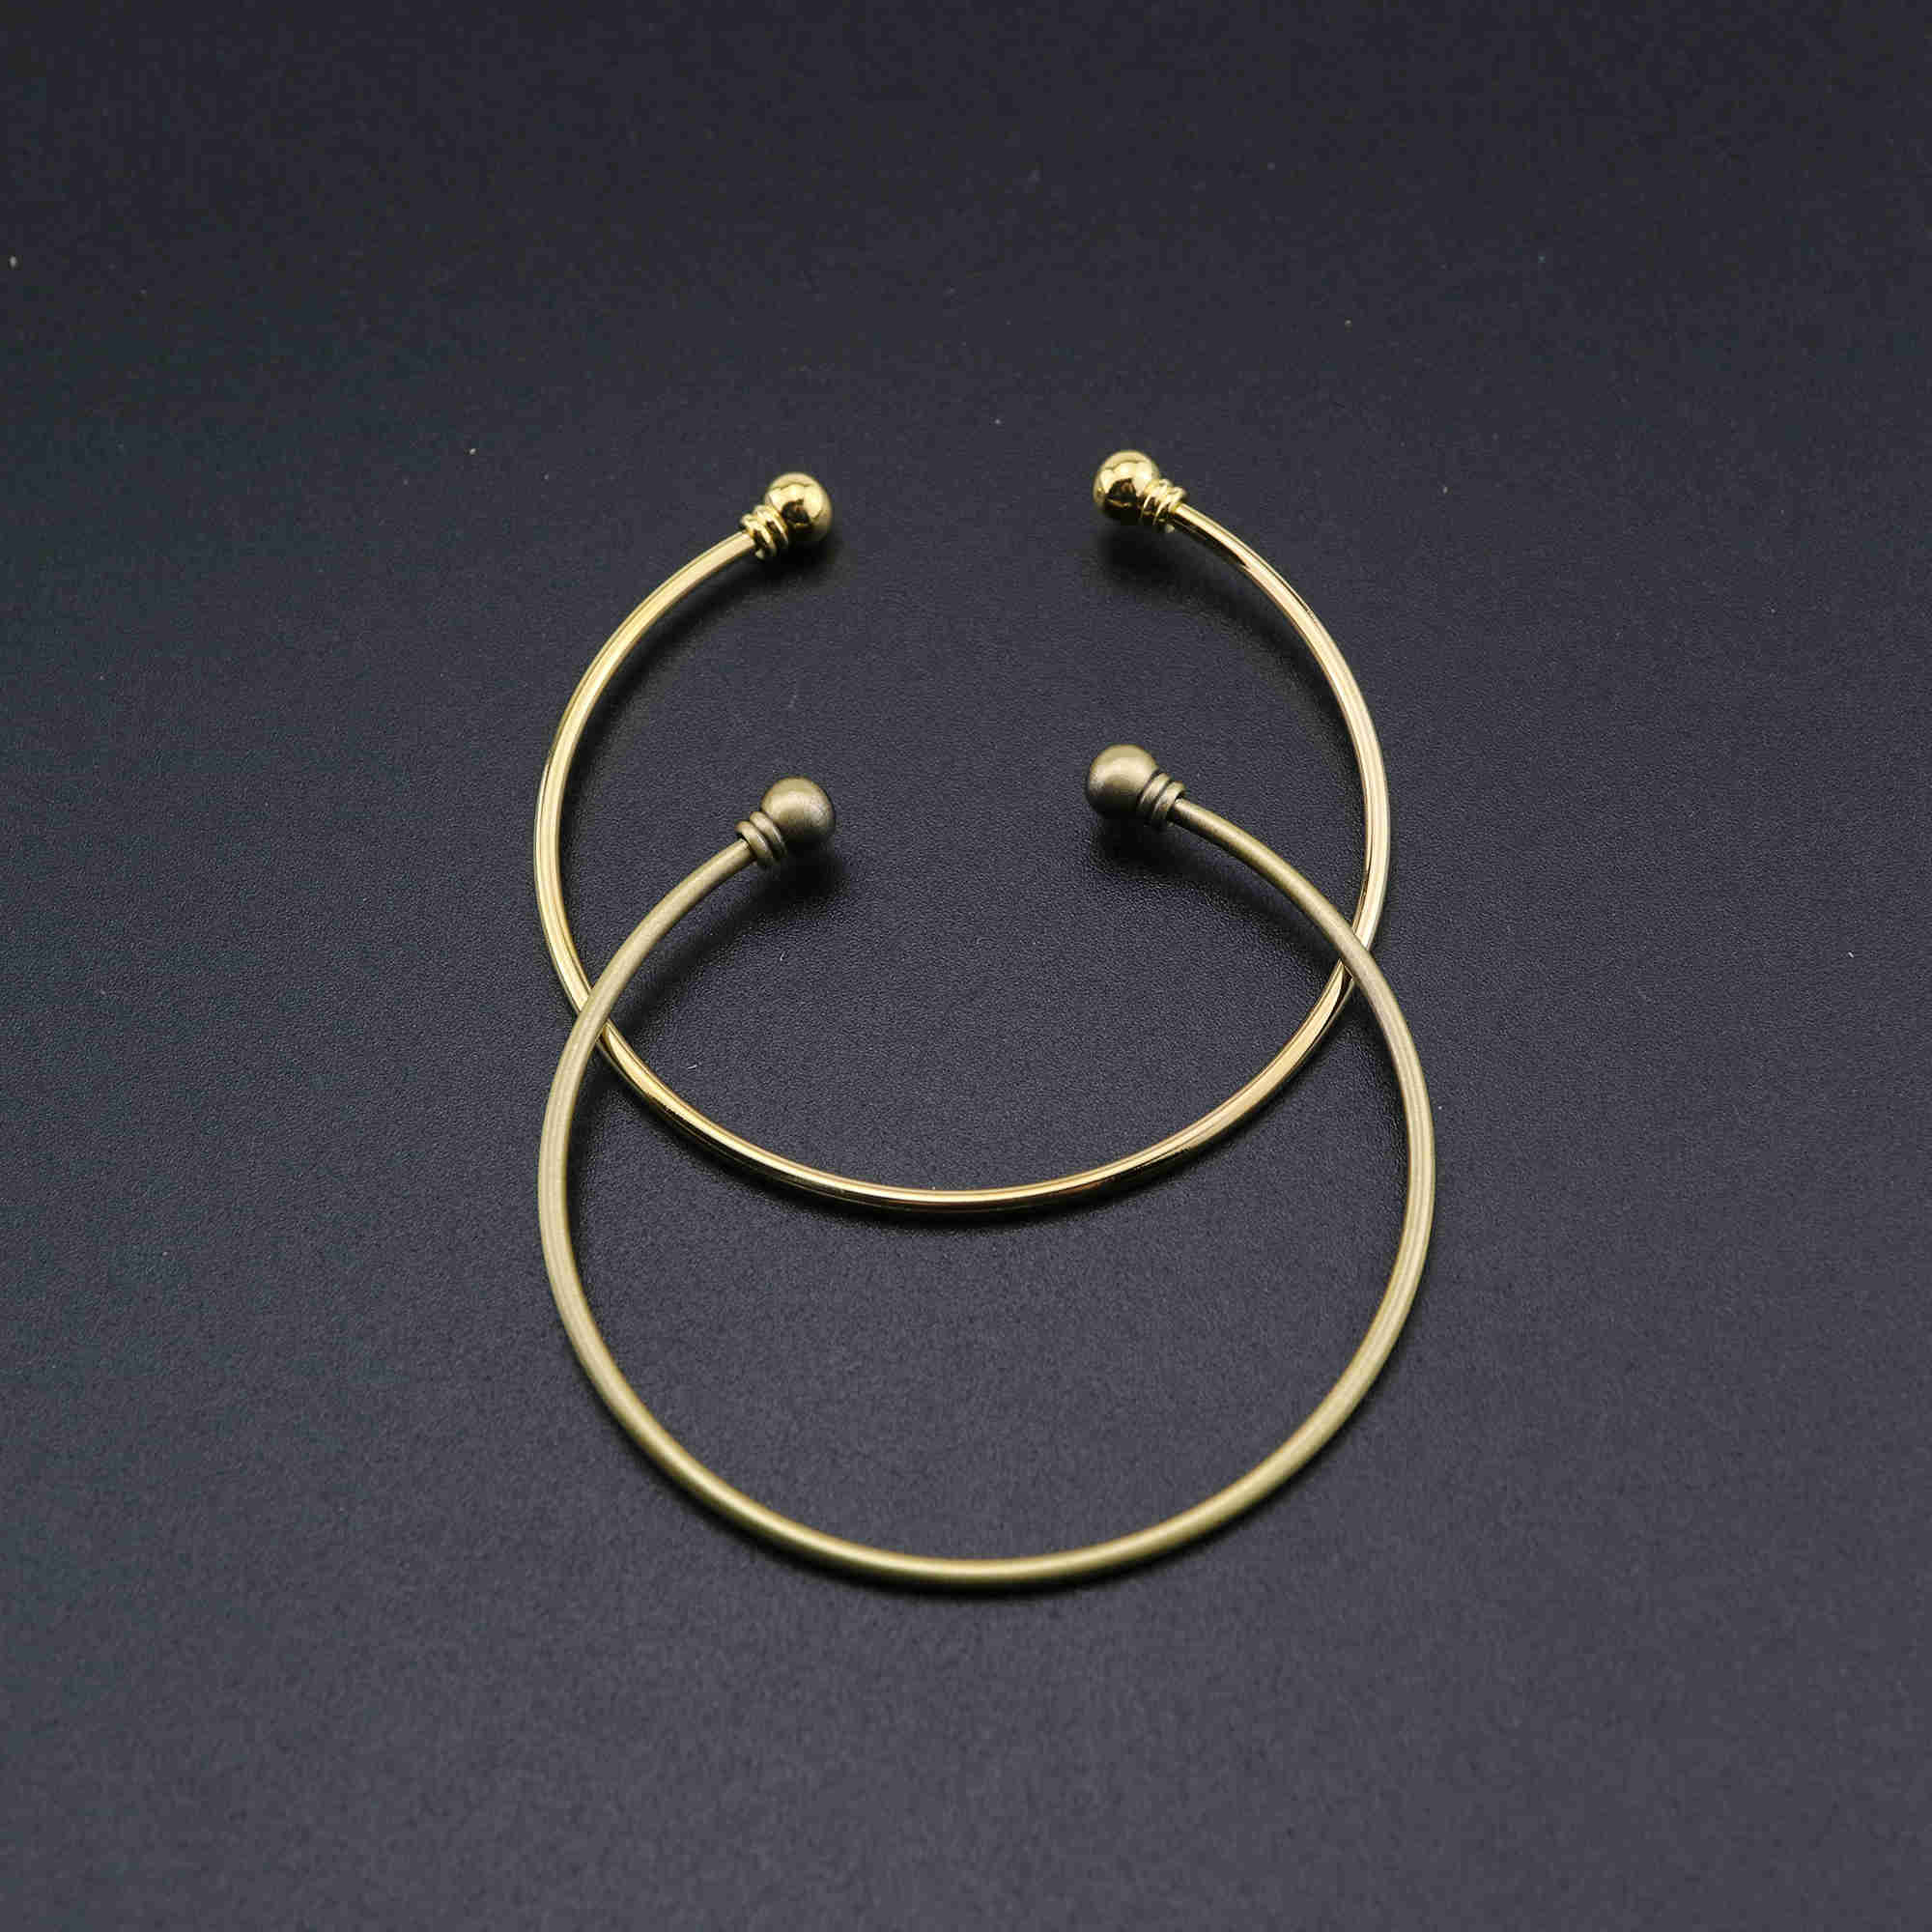 1Pcs Vintage Style Brass Bronze Gold Plated Screwed Ball End Bracelet Bangle DIY Beading Supplies 58MM Diameter 1900235 - Click Image to Close